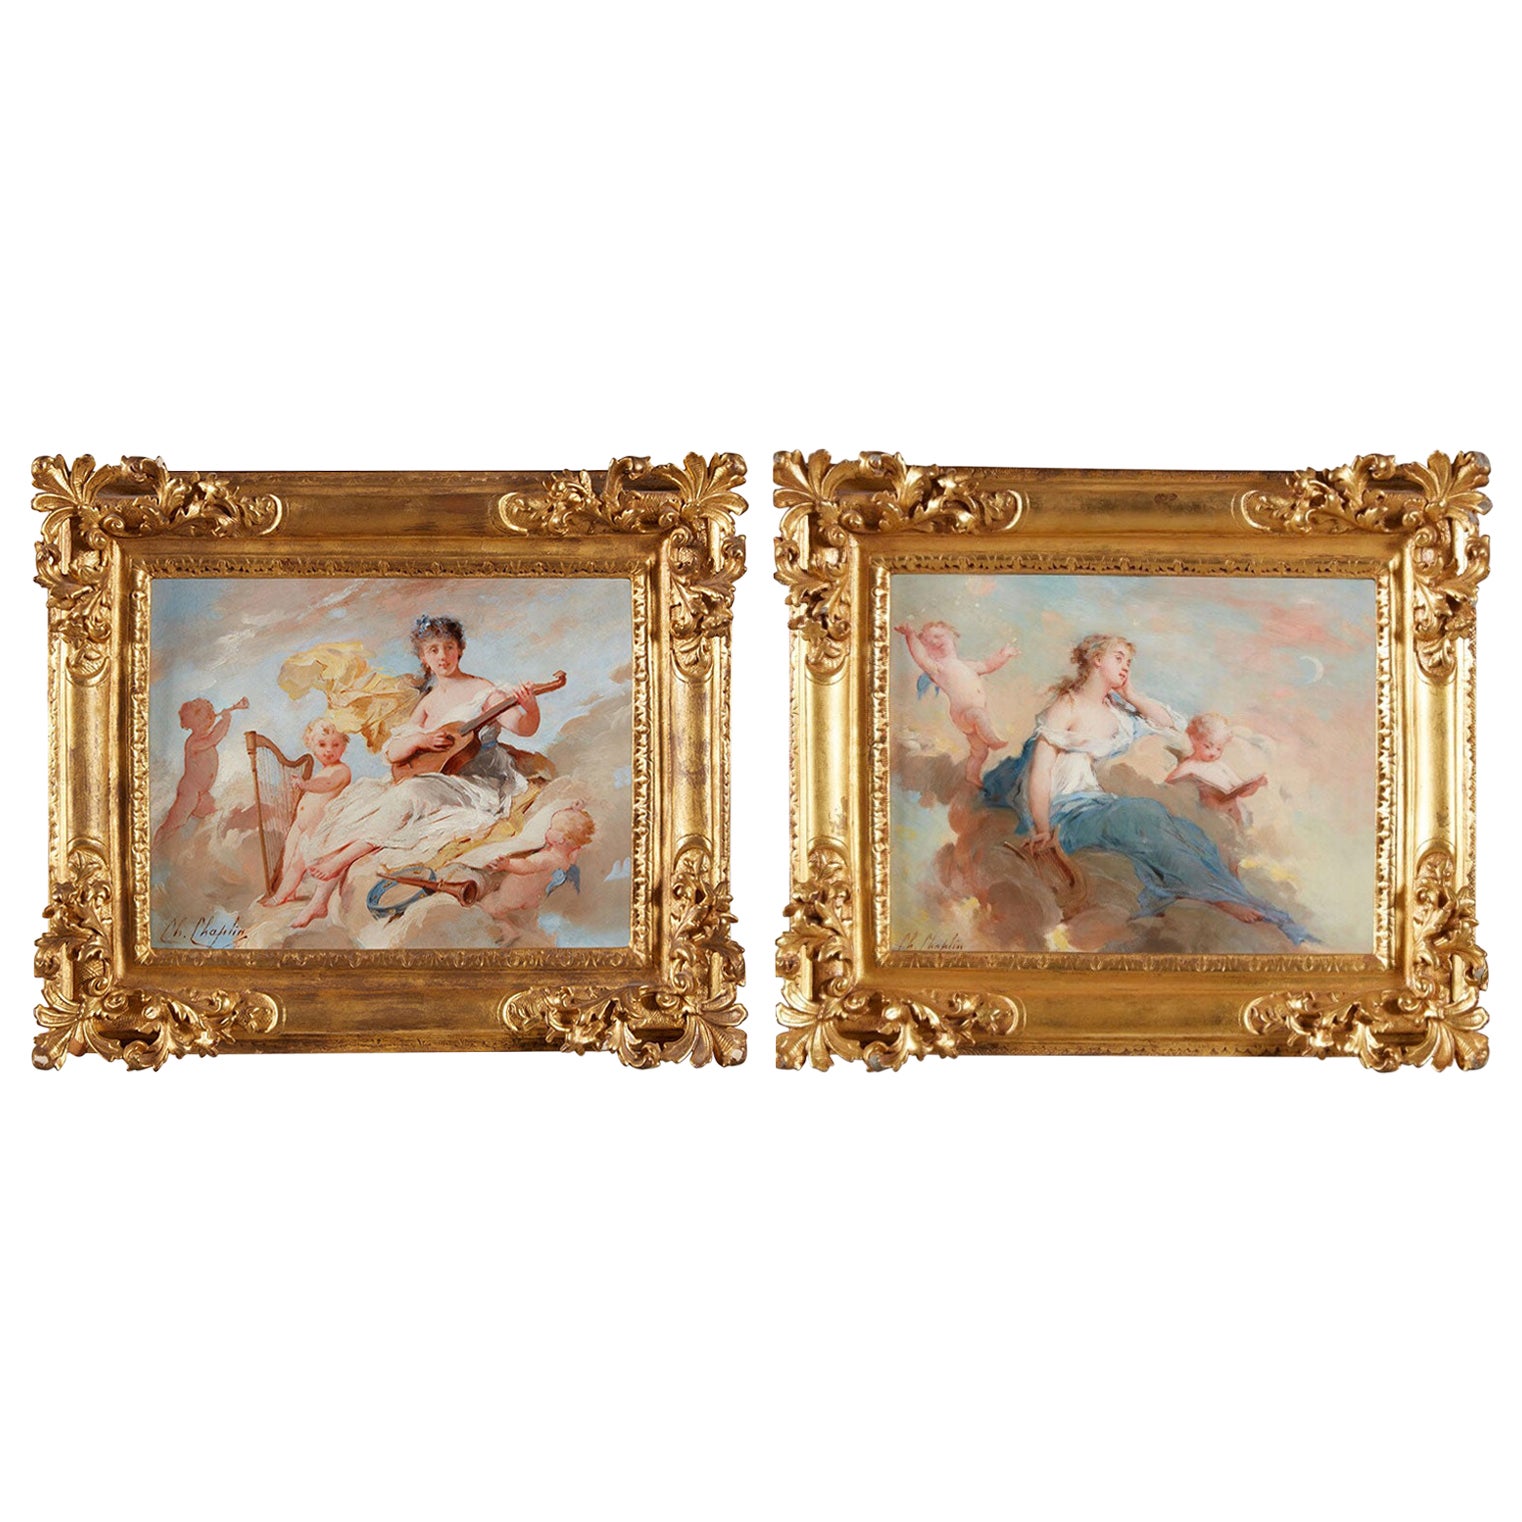 A fine pair of Allegorical paintings of Poetry and Music by Charles Chaplin

Title: Allegory of Poetry and Music
Artist: Charles Chaplin (1825-1891)
Date: 19th Century
Medium: Oil on panel
Signature: Signed ‘Ch. Chaplin’ L/L
Dimension: panel: